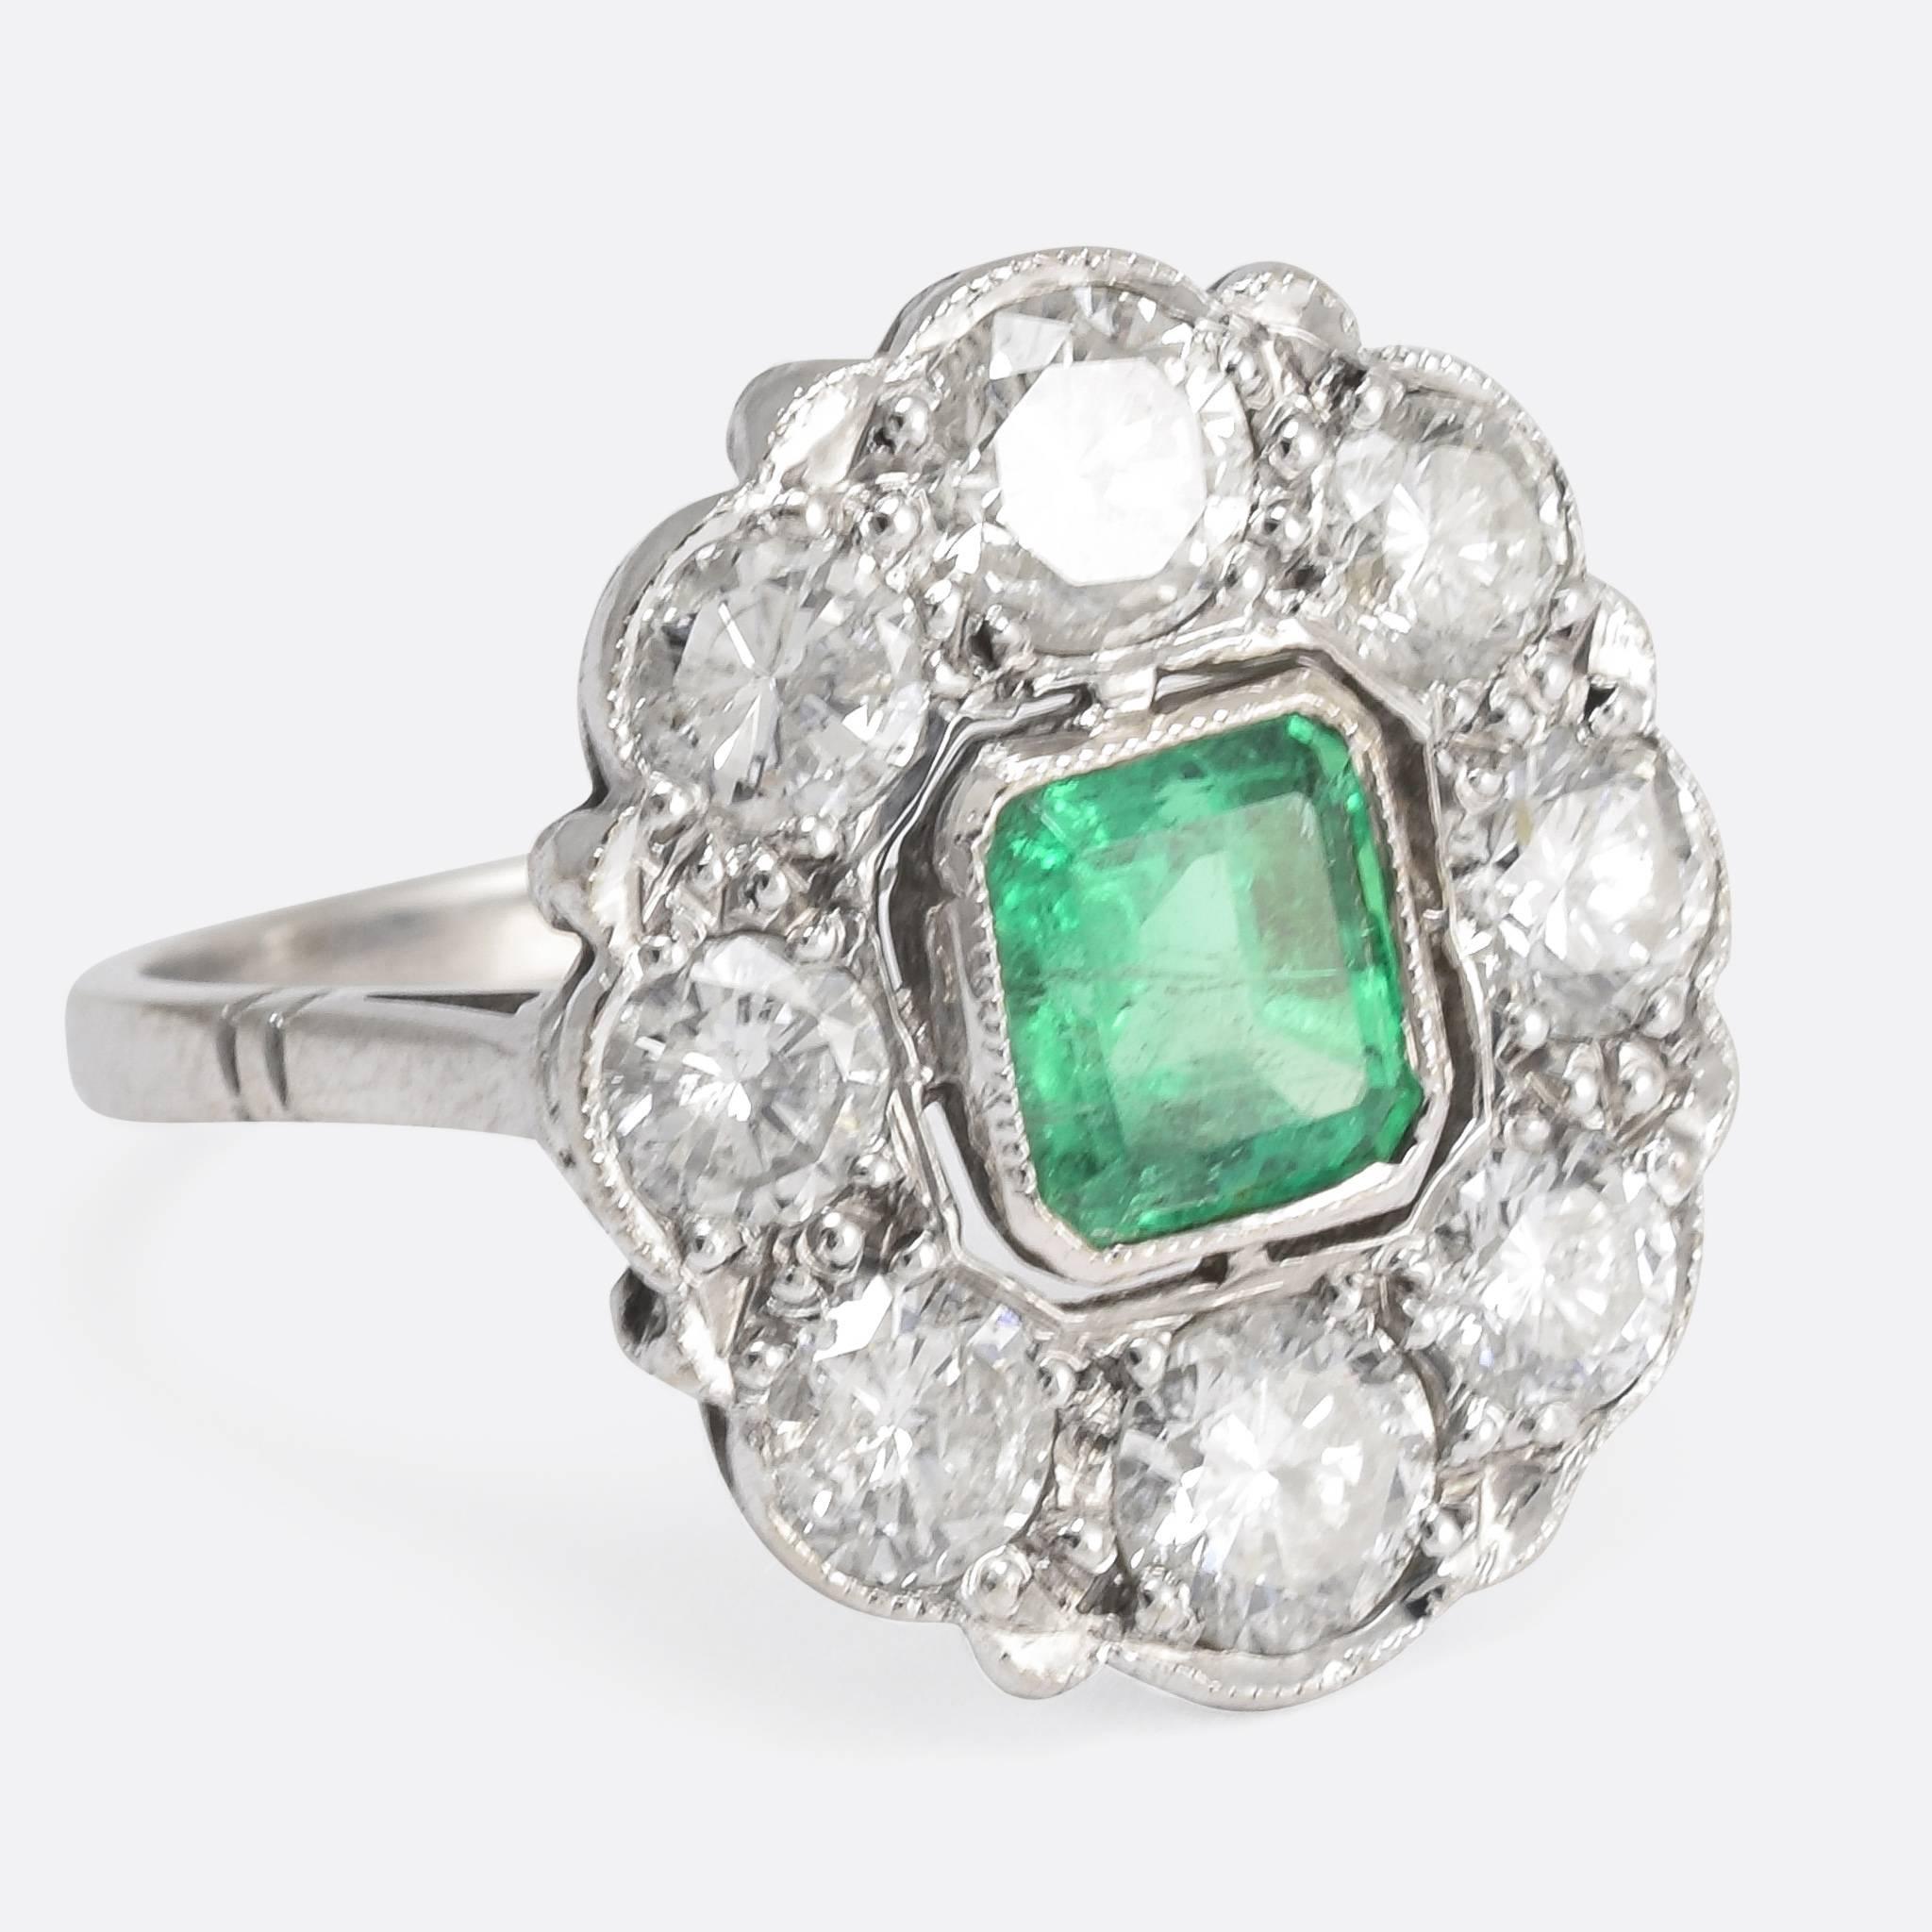 This stunning antique cluster ring dates to the late Edwardian period, and is home to a, exquisite central emerald – of excellent colour – and a 1.72ct cluster of brilliant cut diamonds. The ring is modelled in 18k white gold, with the stones set in